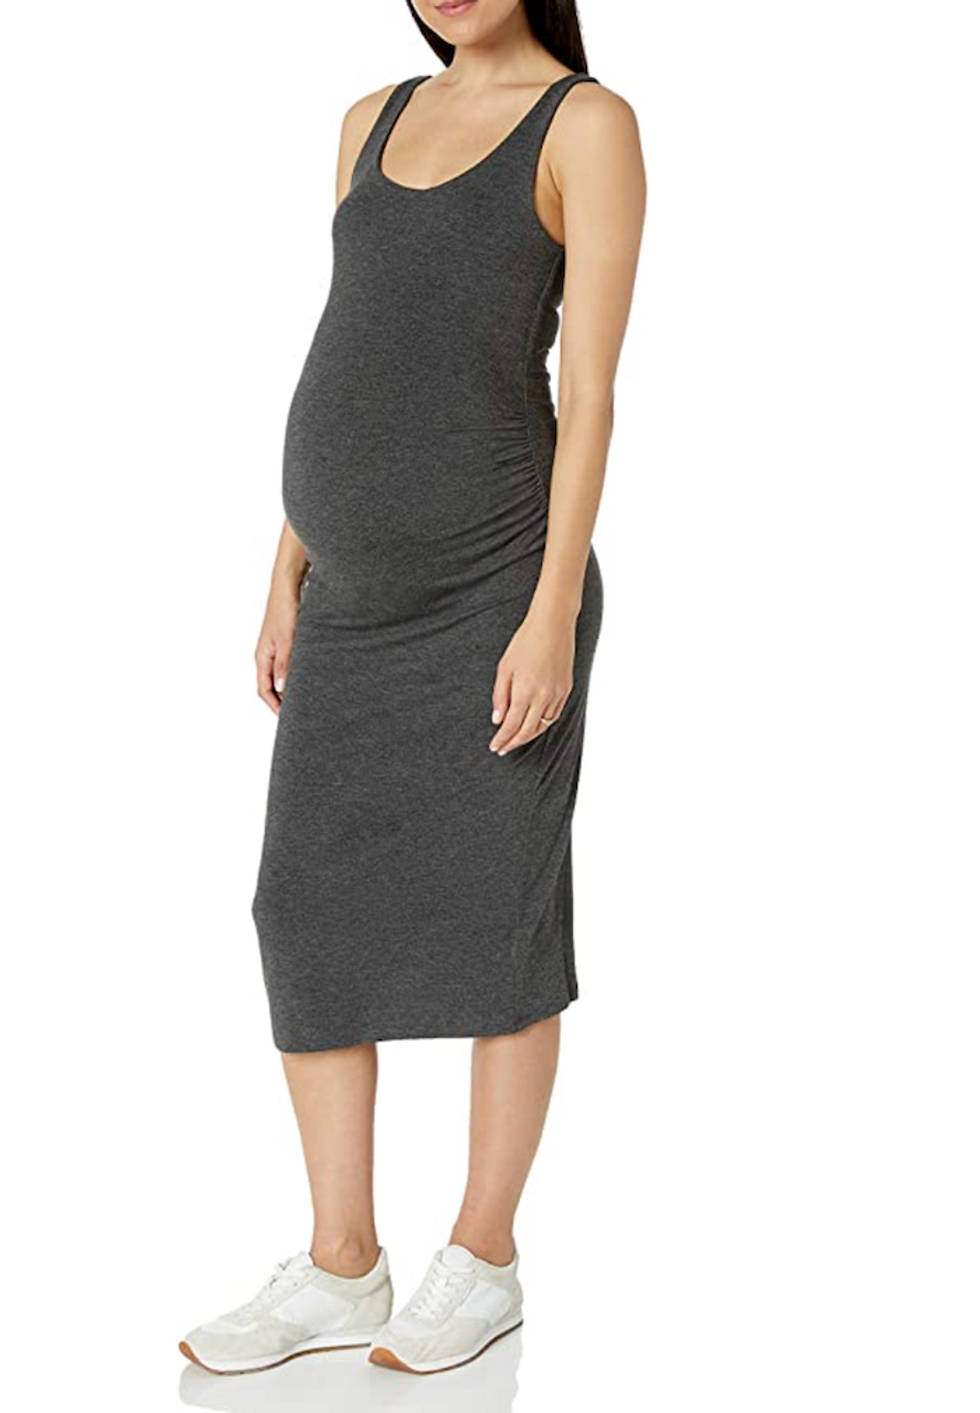 These  maternity dresses are cute + comfy for summer